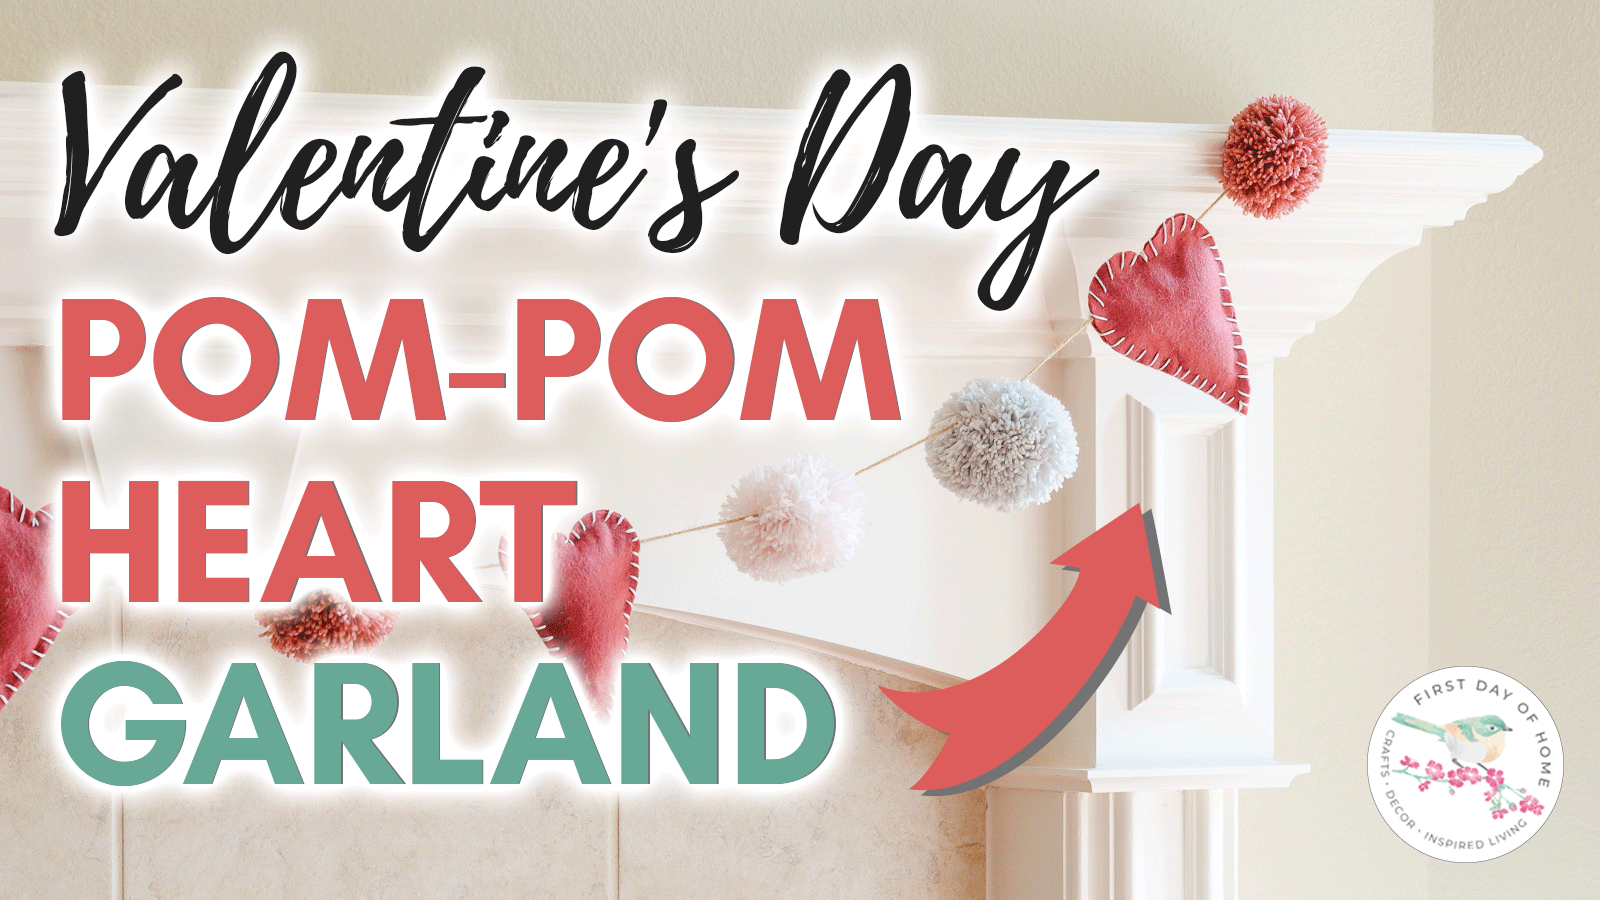 Valentine's Day garland with felt hearts and pom poms YouTube thumbnail.